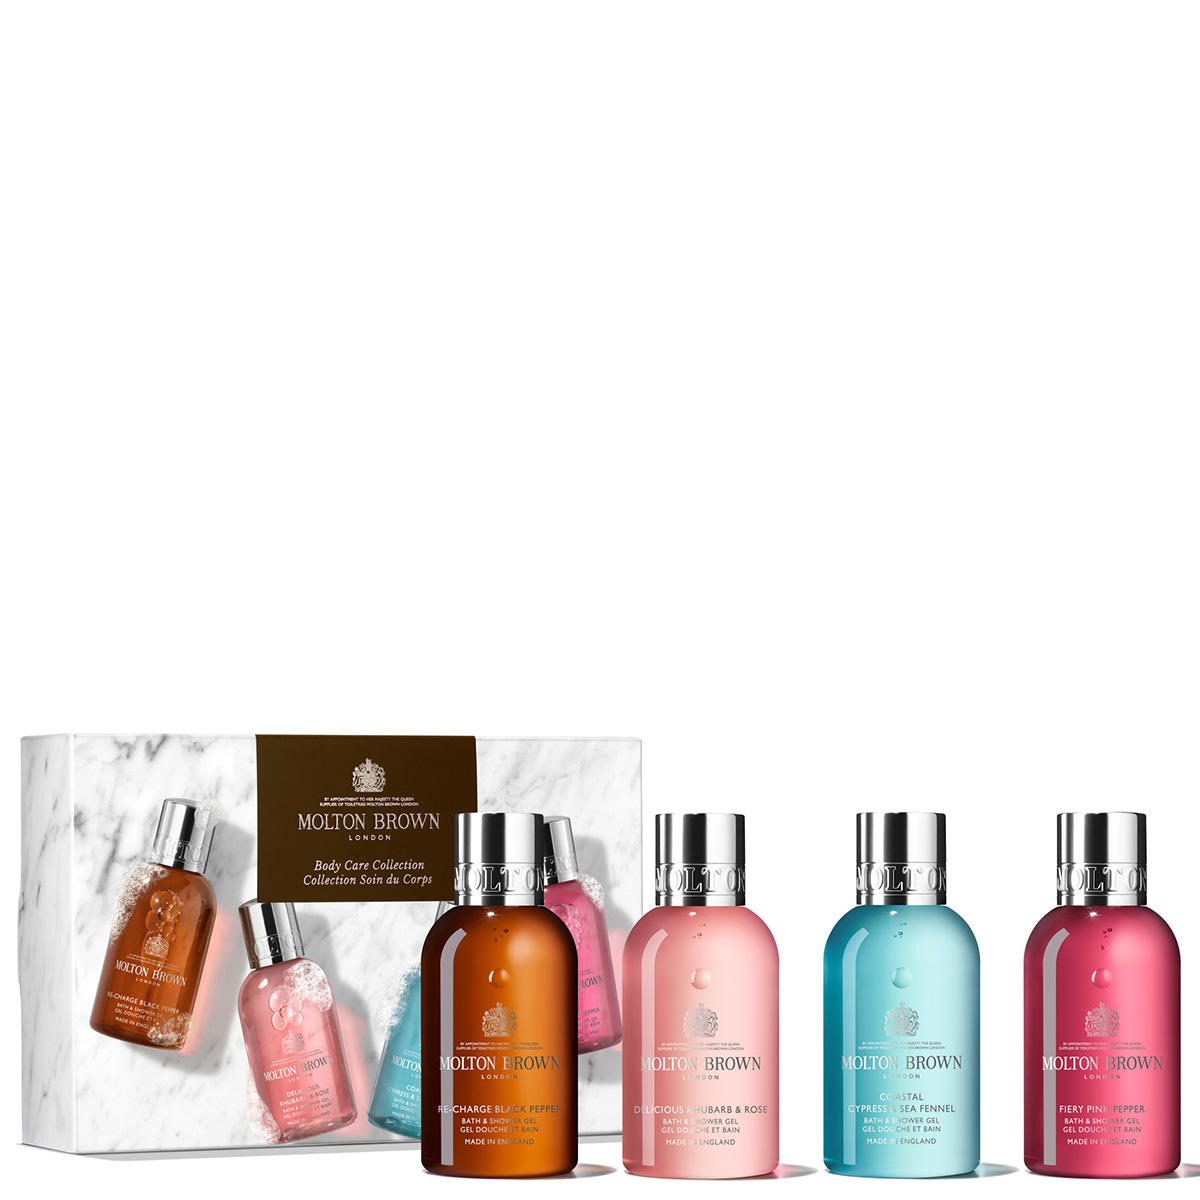 MOLTON BROWN Woody & Floral Body Care Travel Set  - 1